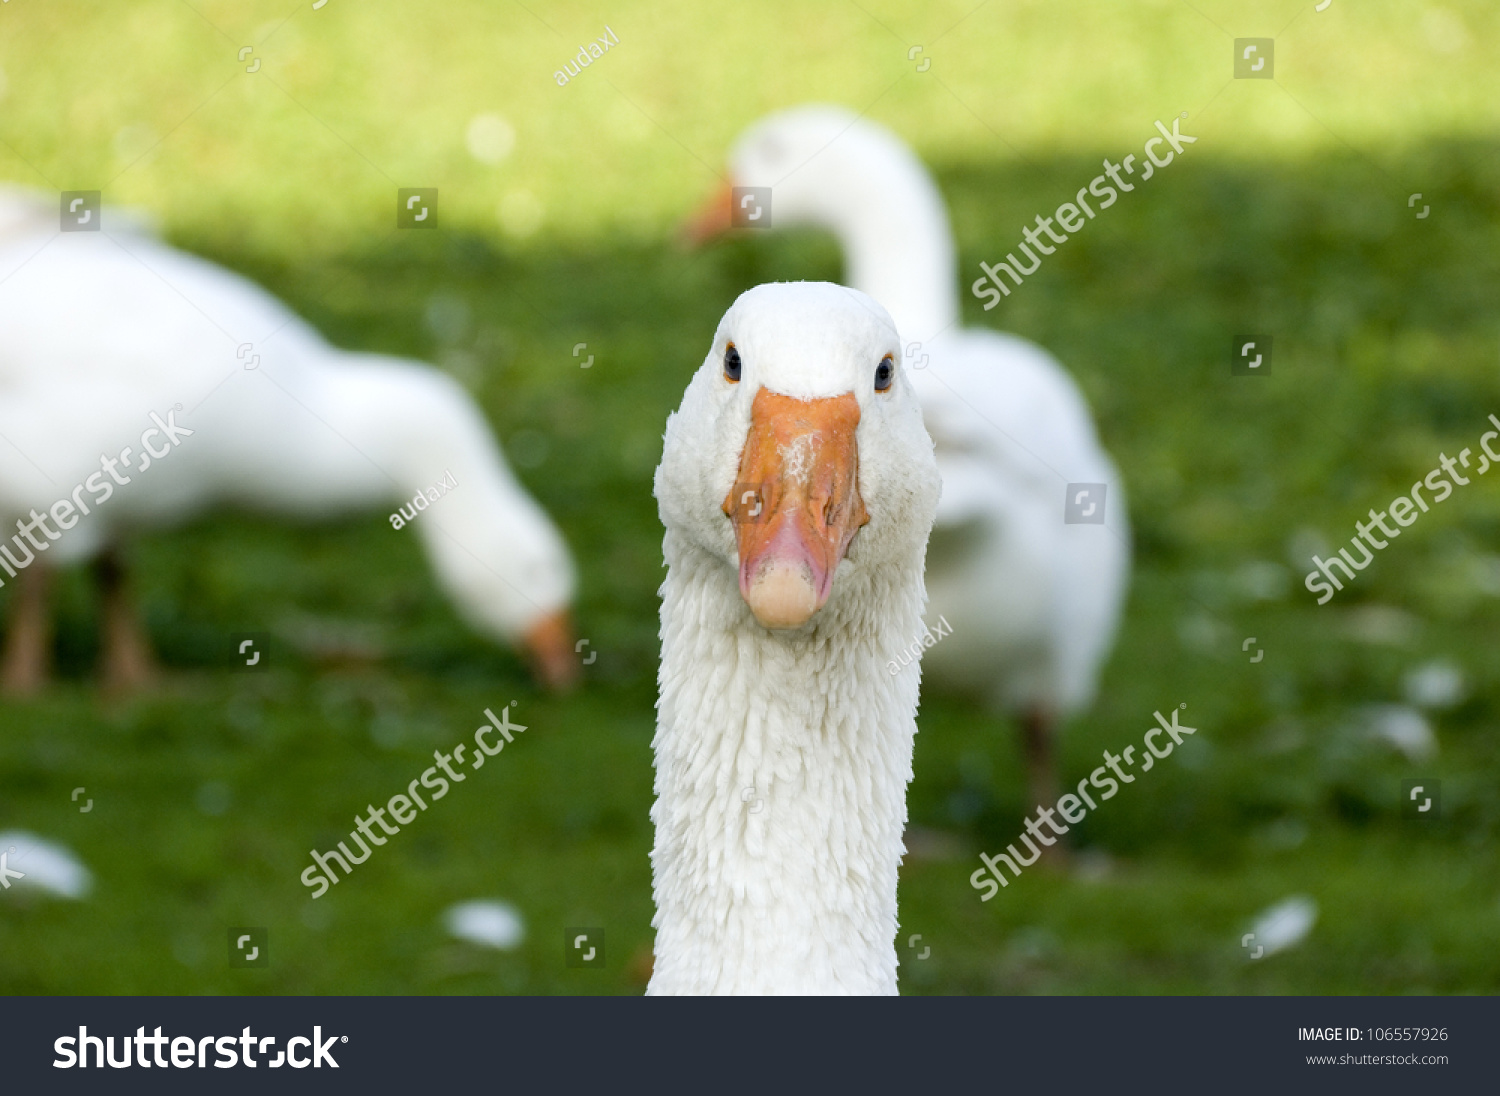 Funny Look White Domestic Goose Space Stock Photo 106557926 - Shutterstock